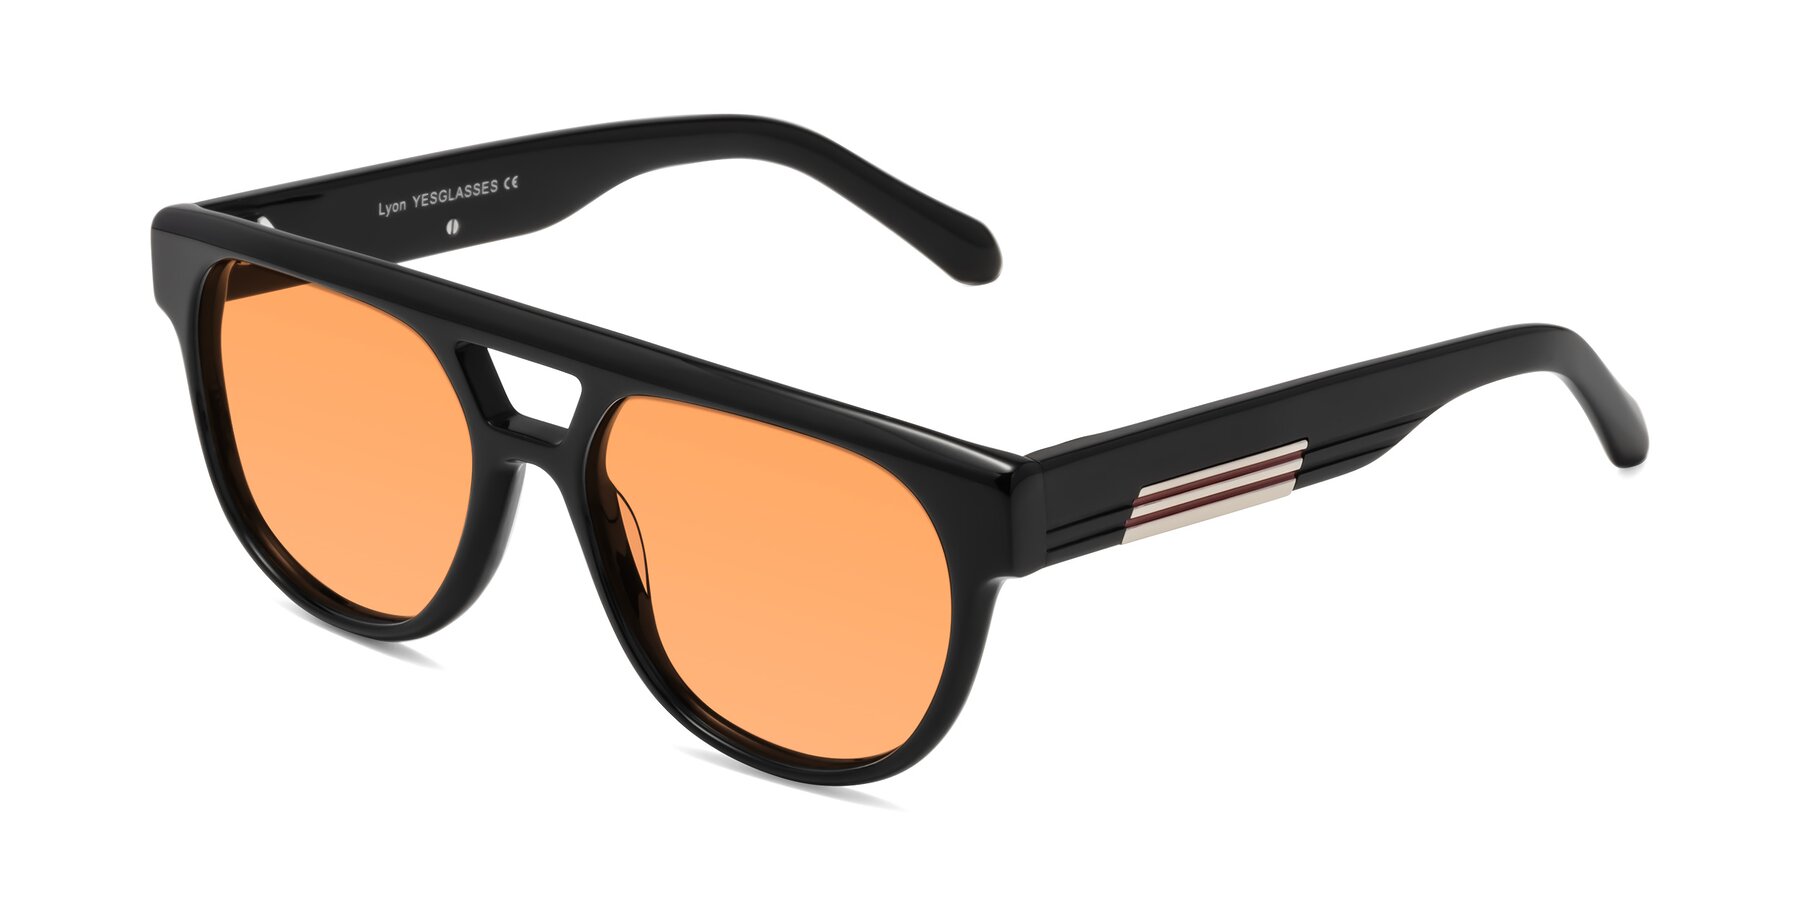 Angle of Lyon in Black with Medium Orange Tinted Lenses